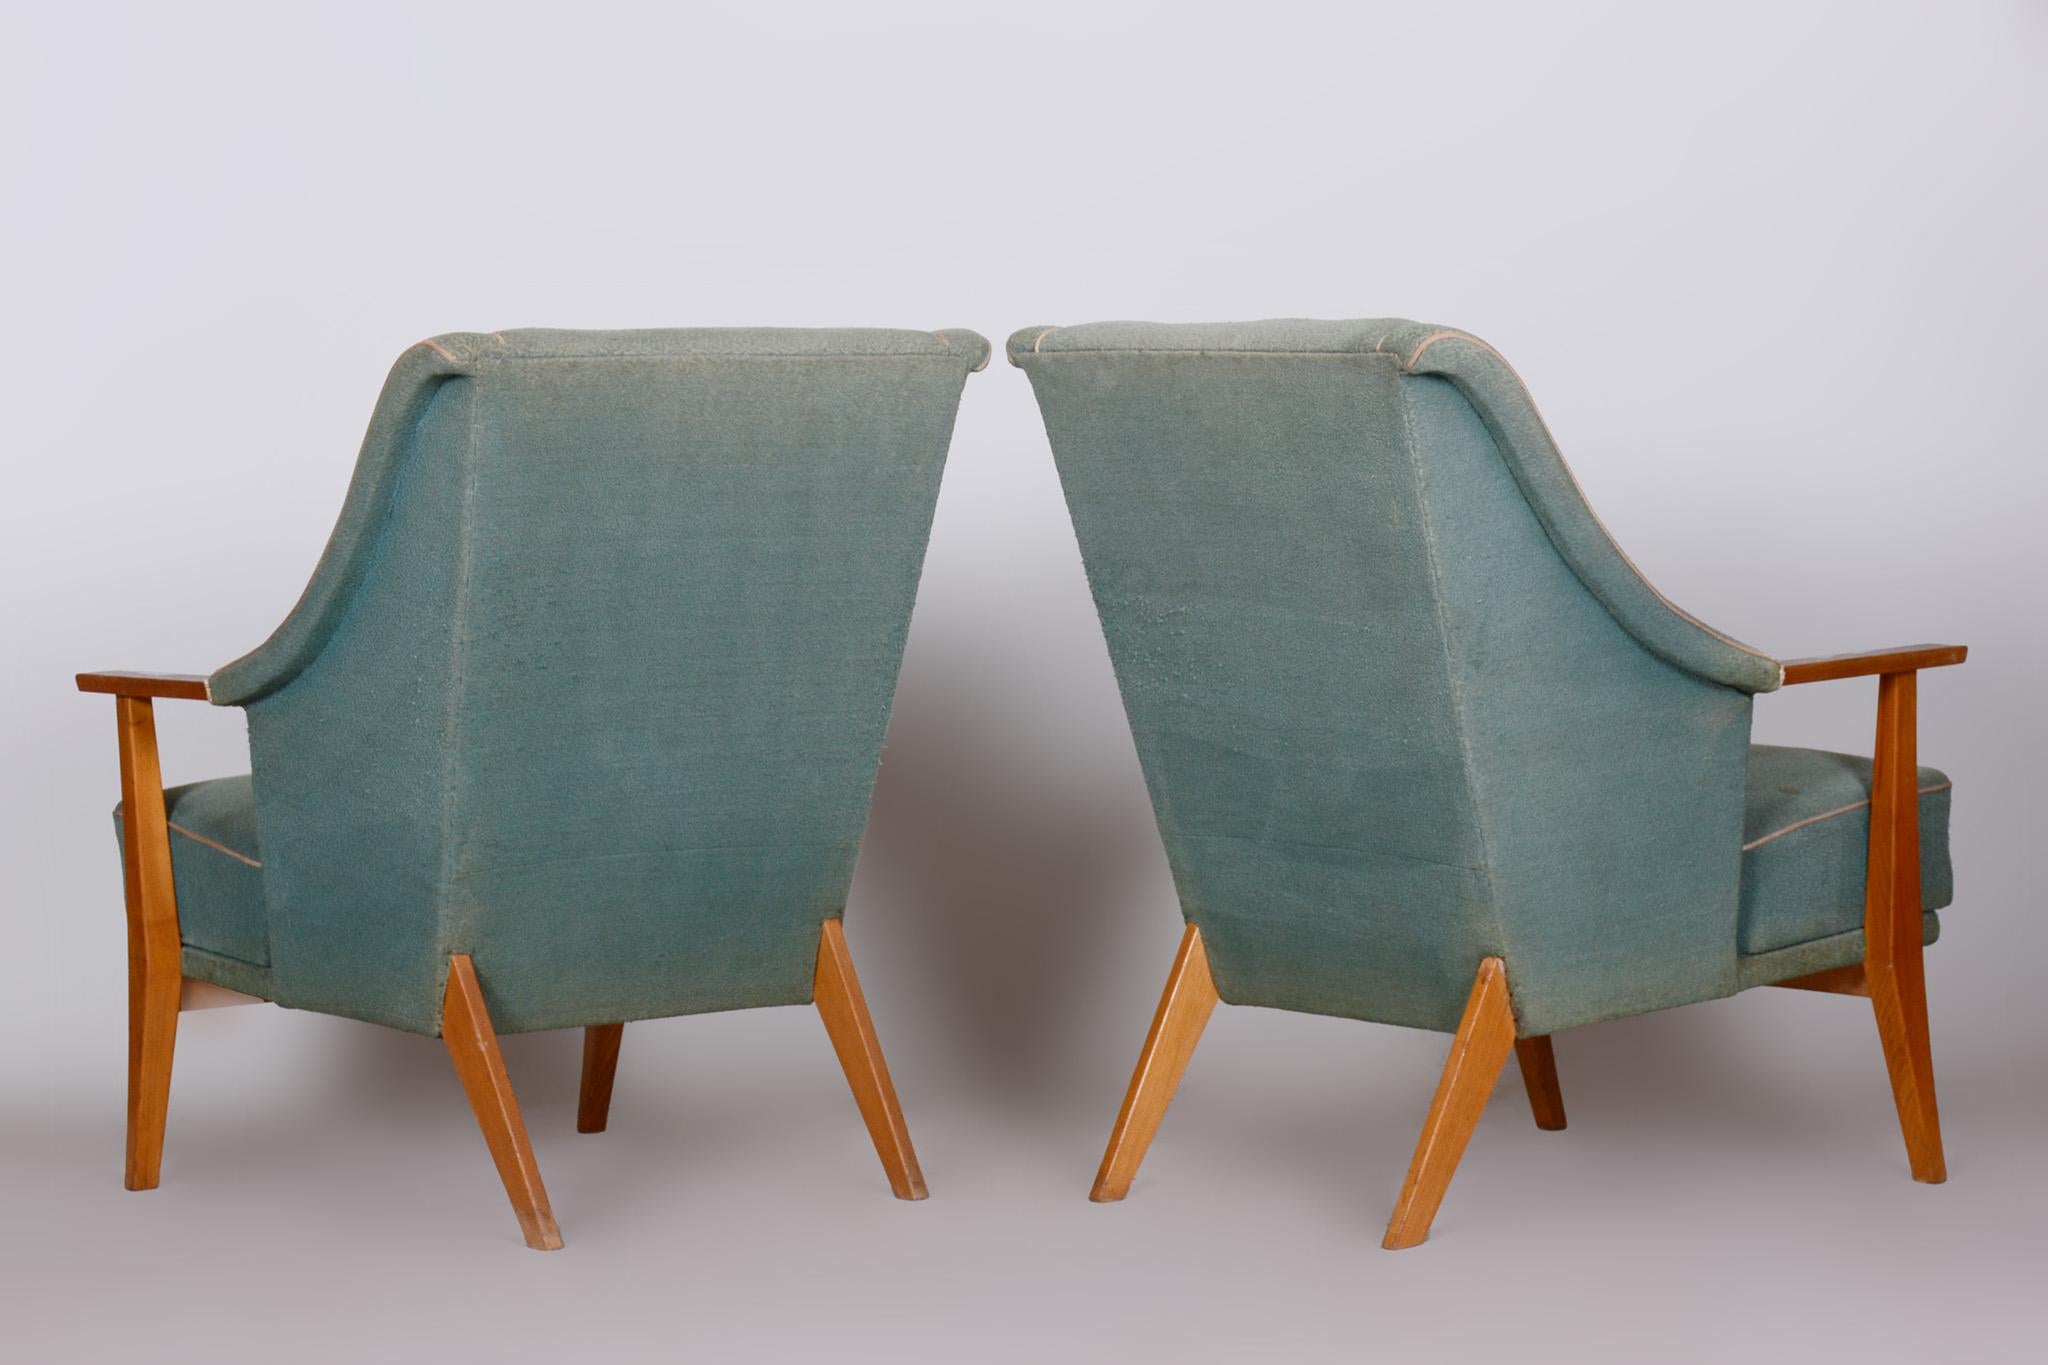 Pair of Unique Green Beech ArtDeco Armchairs Made in 1940s, Denmark For Sale 5